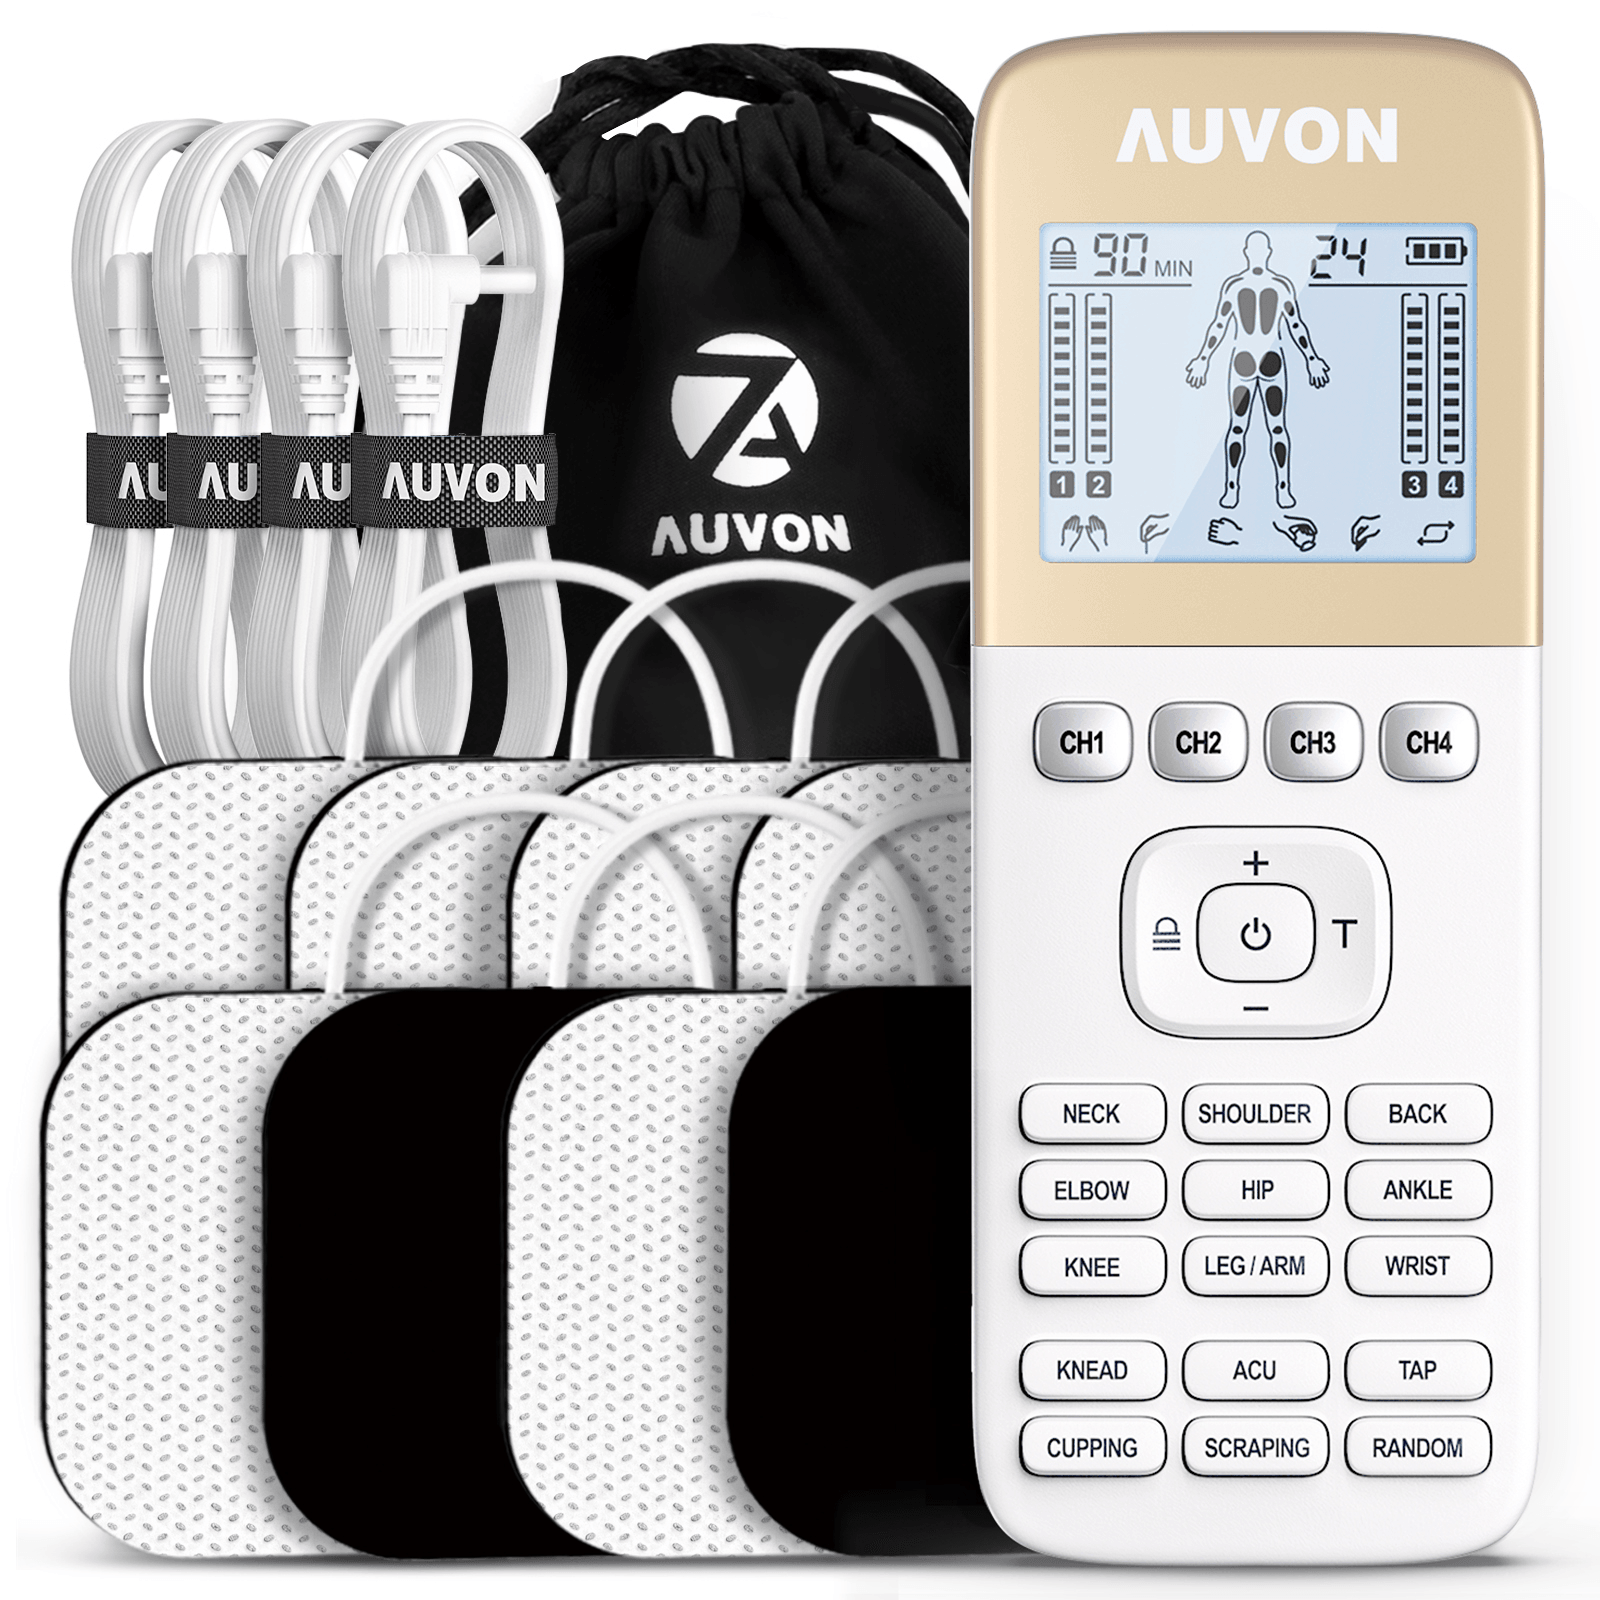 AUVON 4 Outputs H1 TENS Unit 24 Modes Muscle Stimulator for Pain